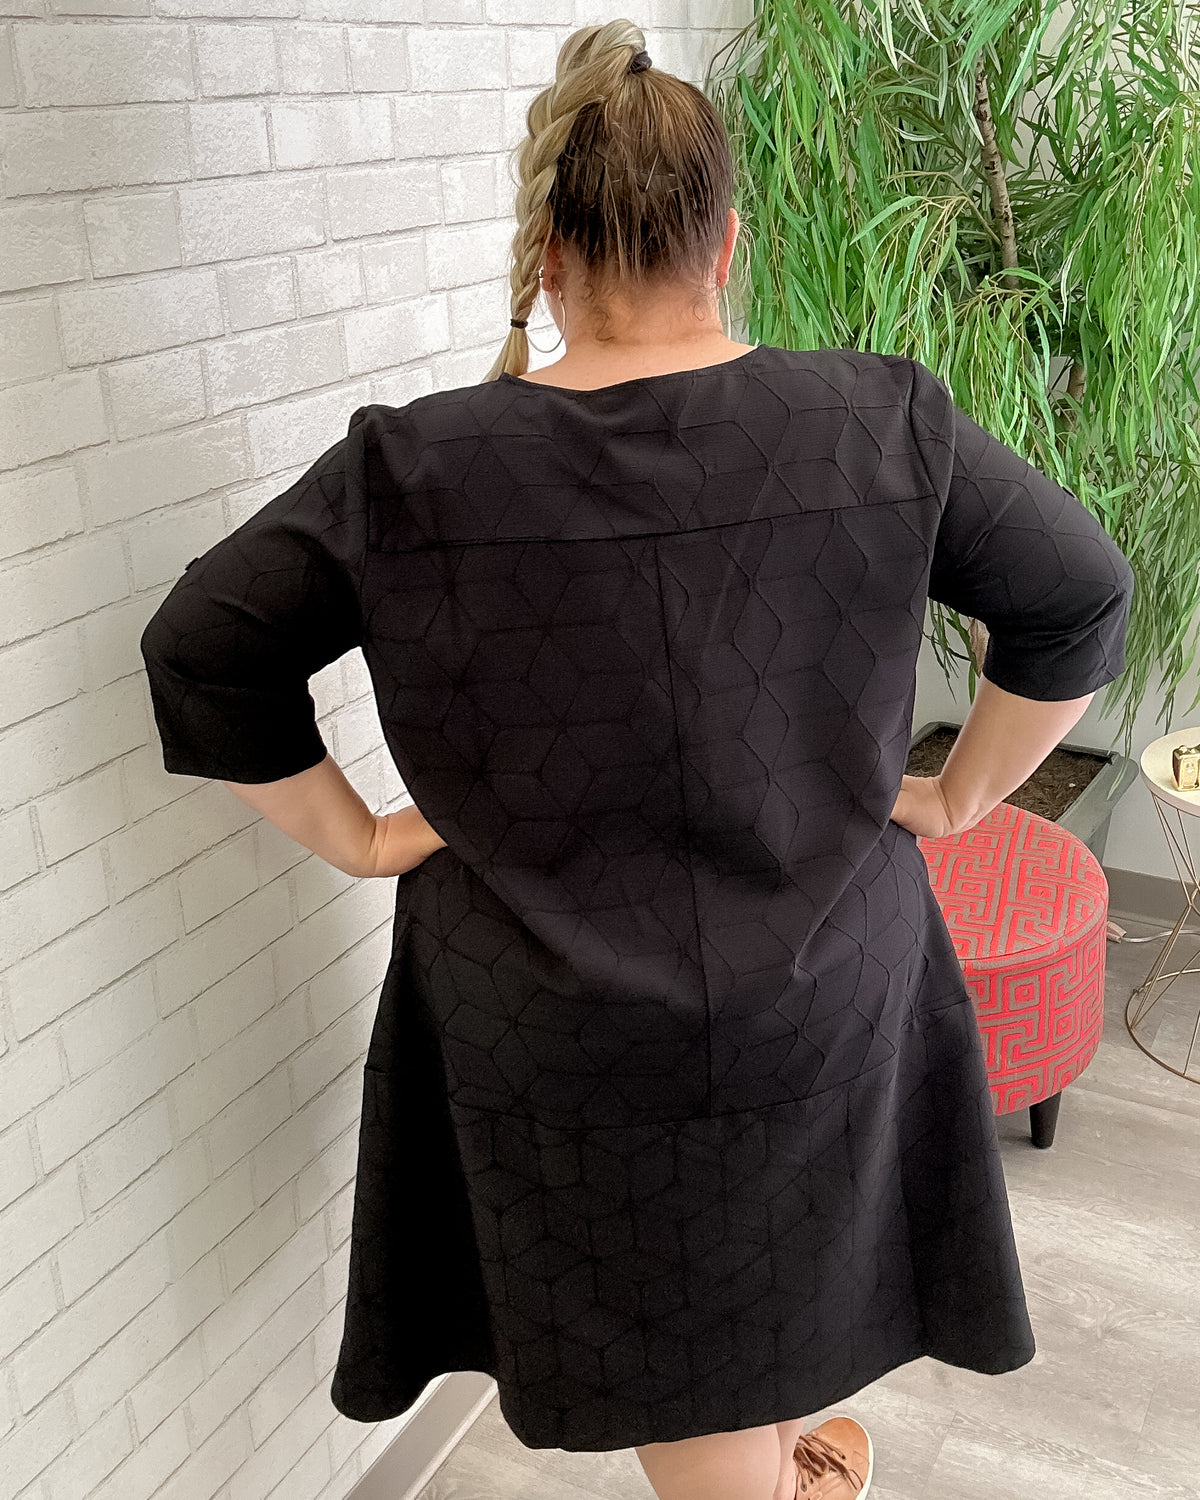 Clifden Tunic in Black